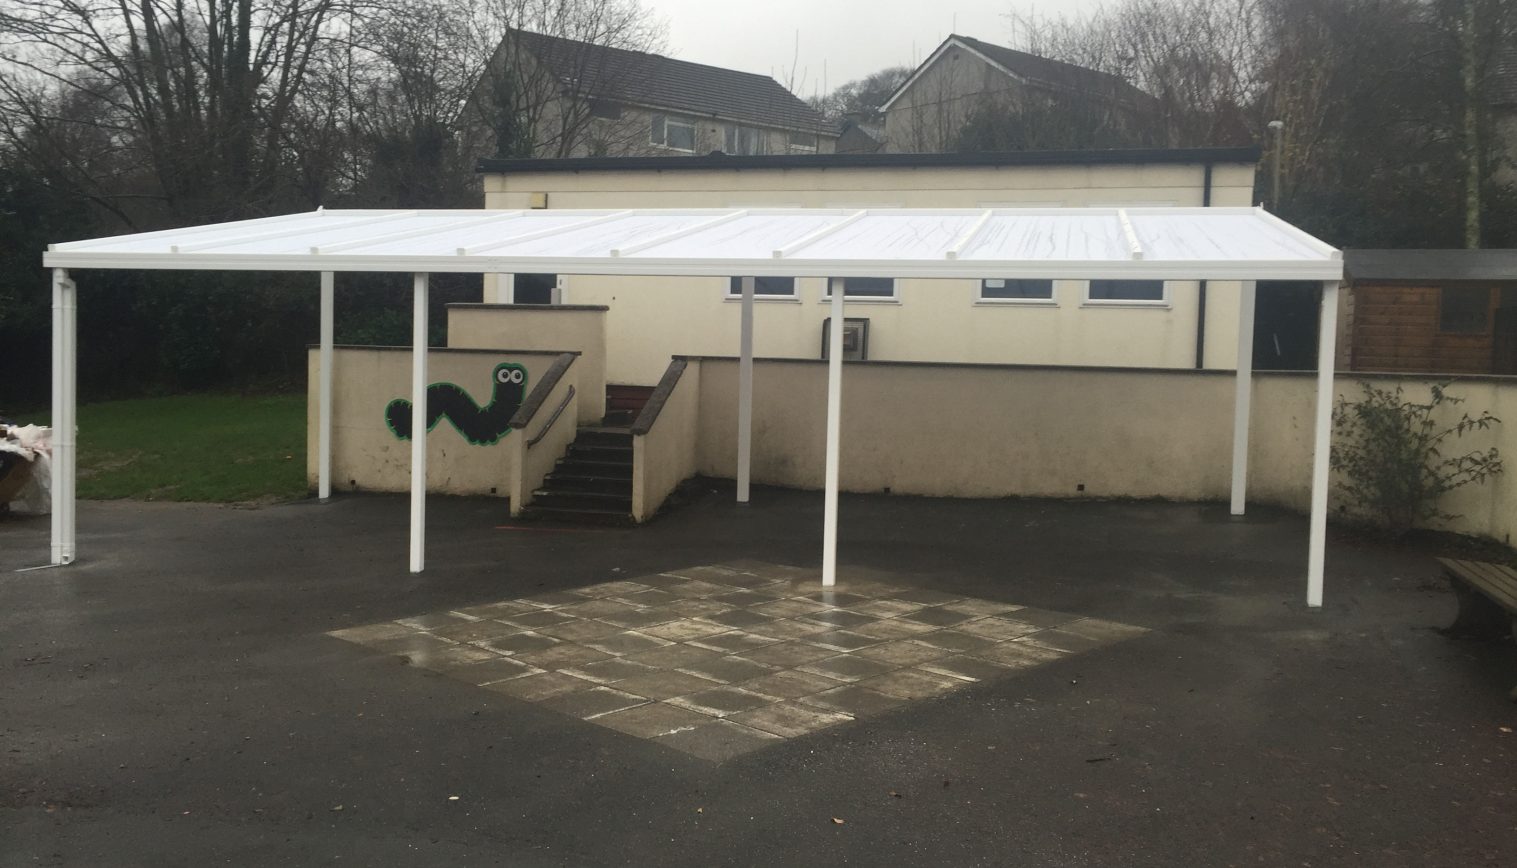 Whitchurch Community Primary School – Second Installation